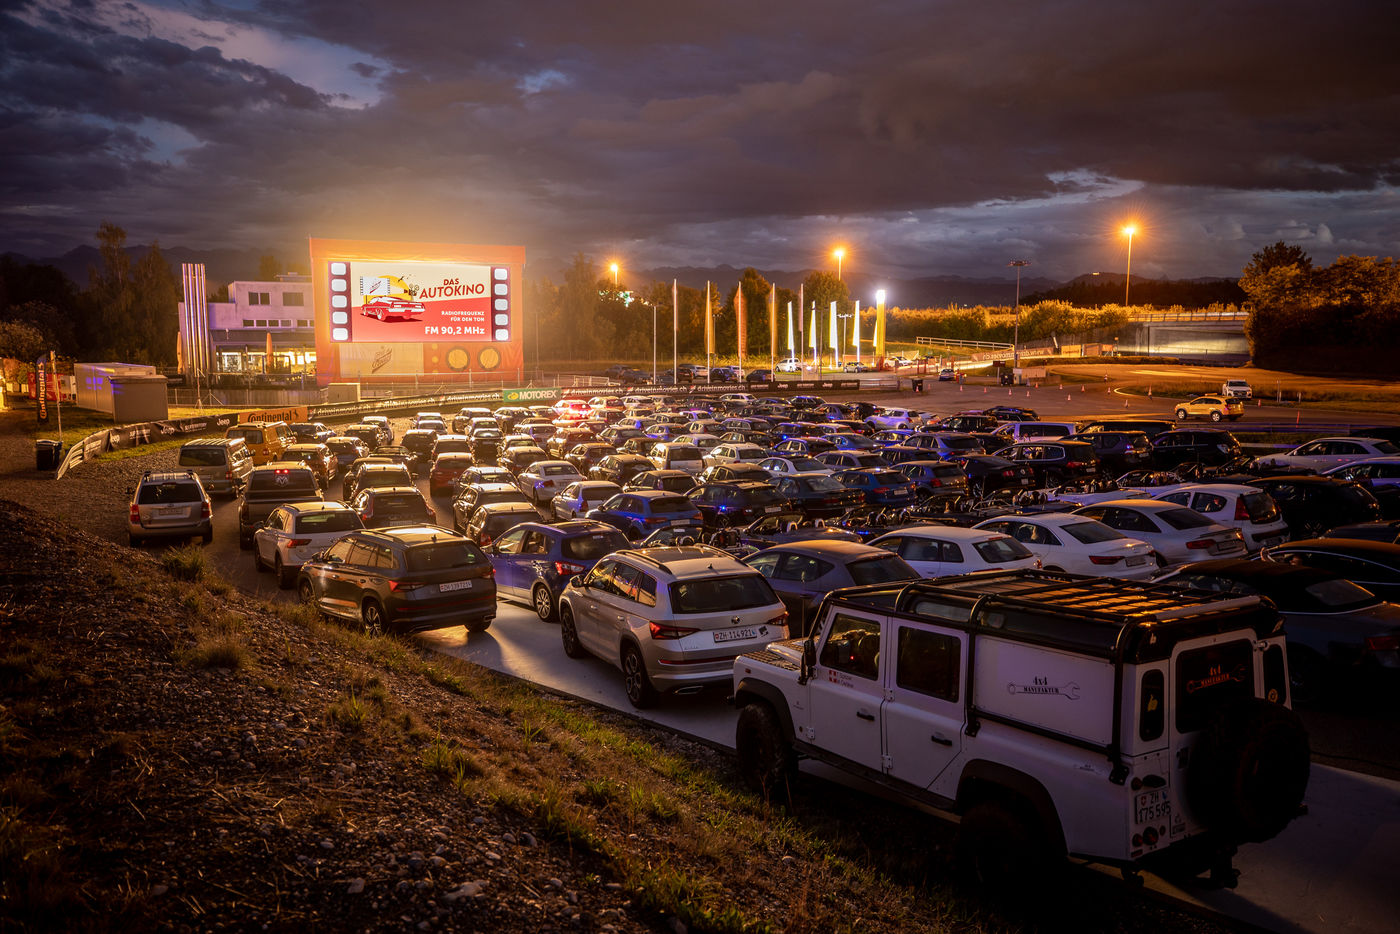 Drive-In-Movies